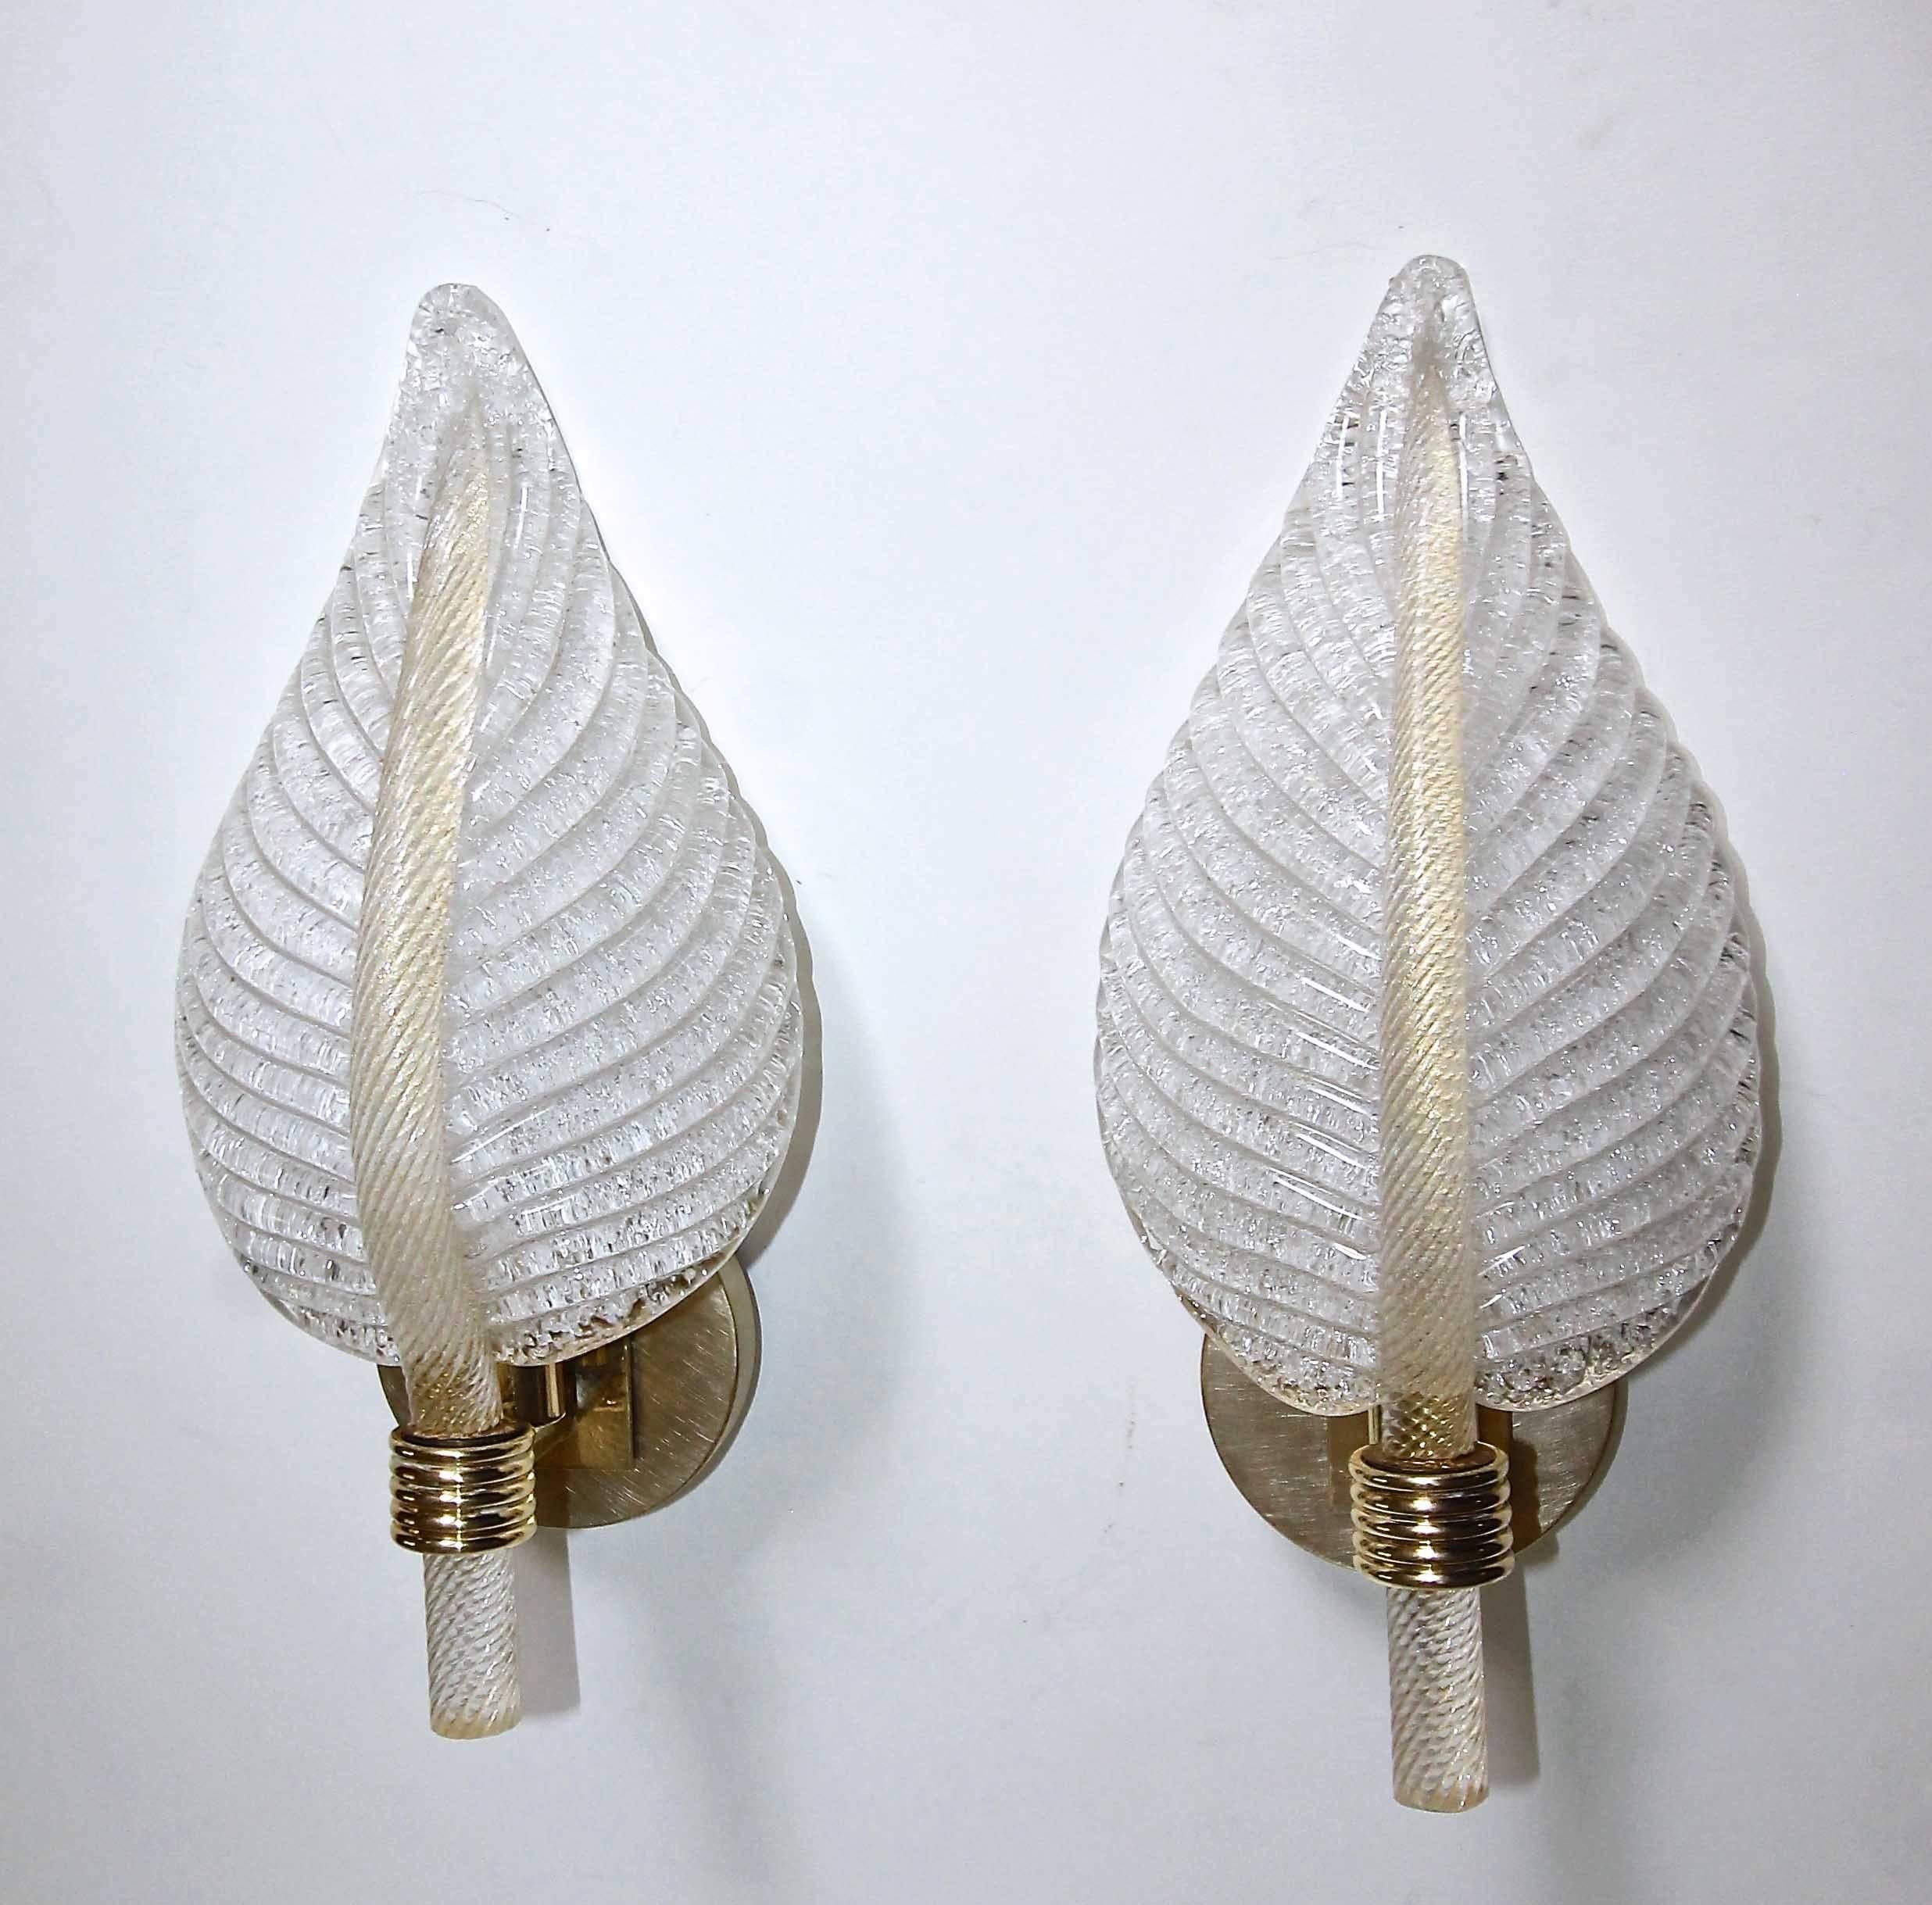 Beautiful pair of Murano glass wall sconces in plume or leaf shape form by Barovier & Toso. Finely twisted glass stem infused with gold flecks and the reverse side of the leaf in the 